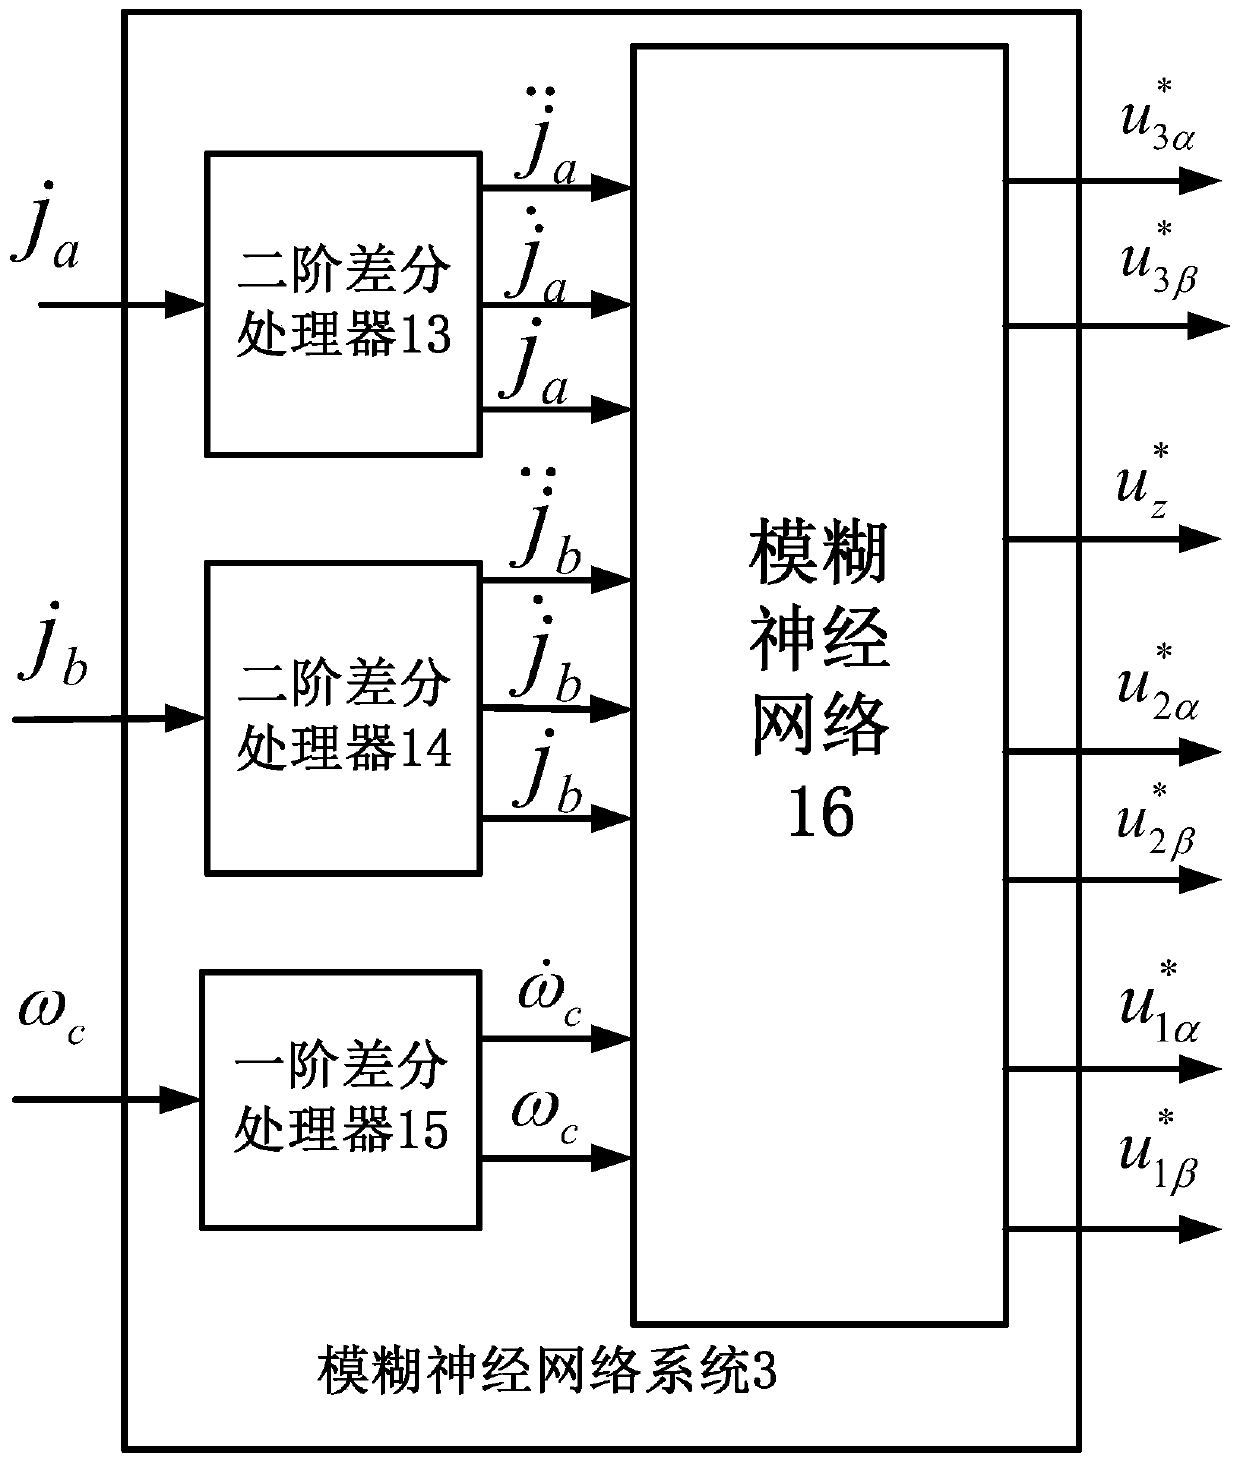 Five degrees of freedom bearingless permanent magnet synchronous motor fuzzy neural network decoupling controller